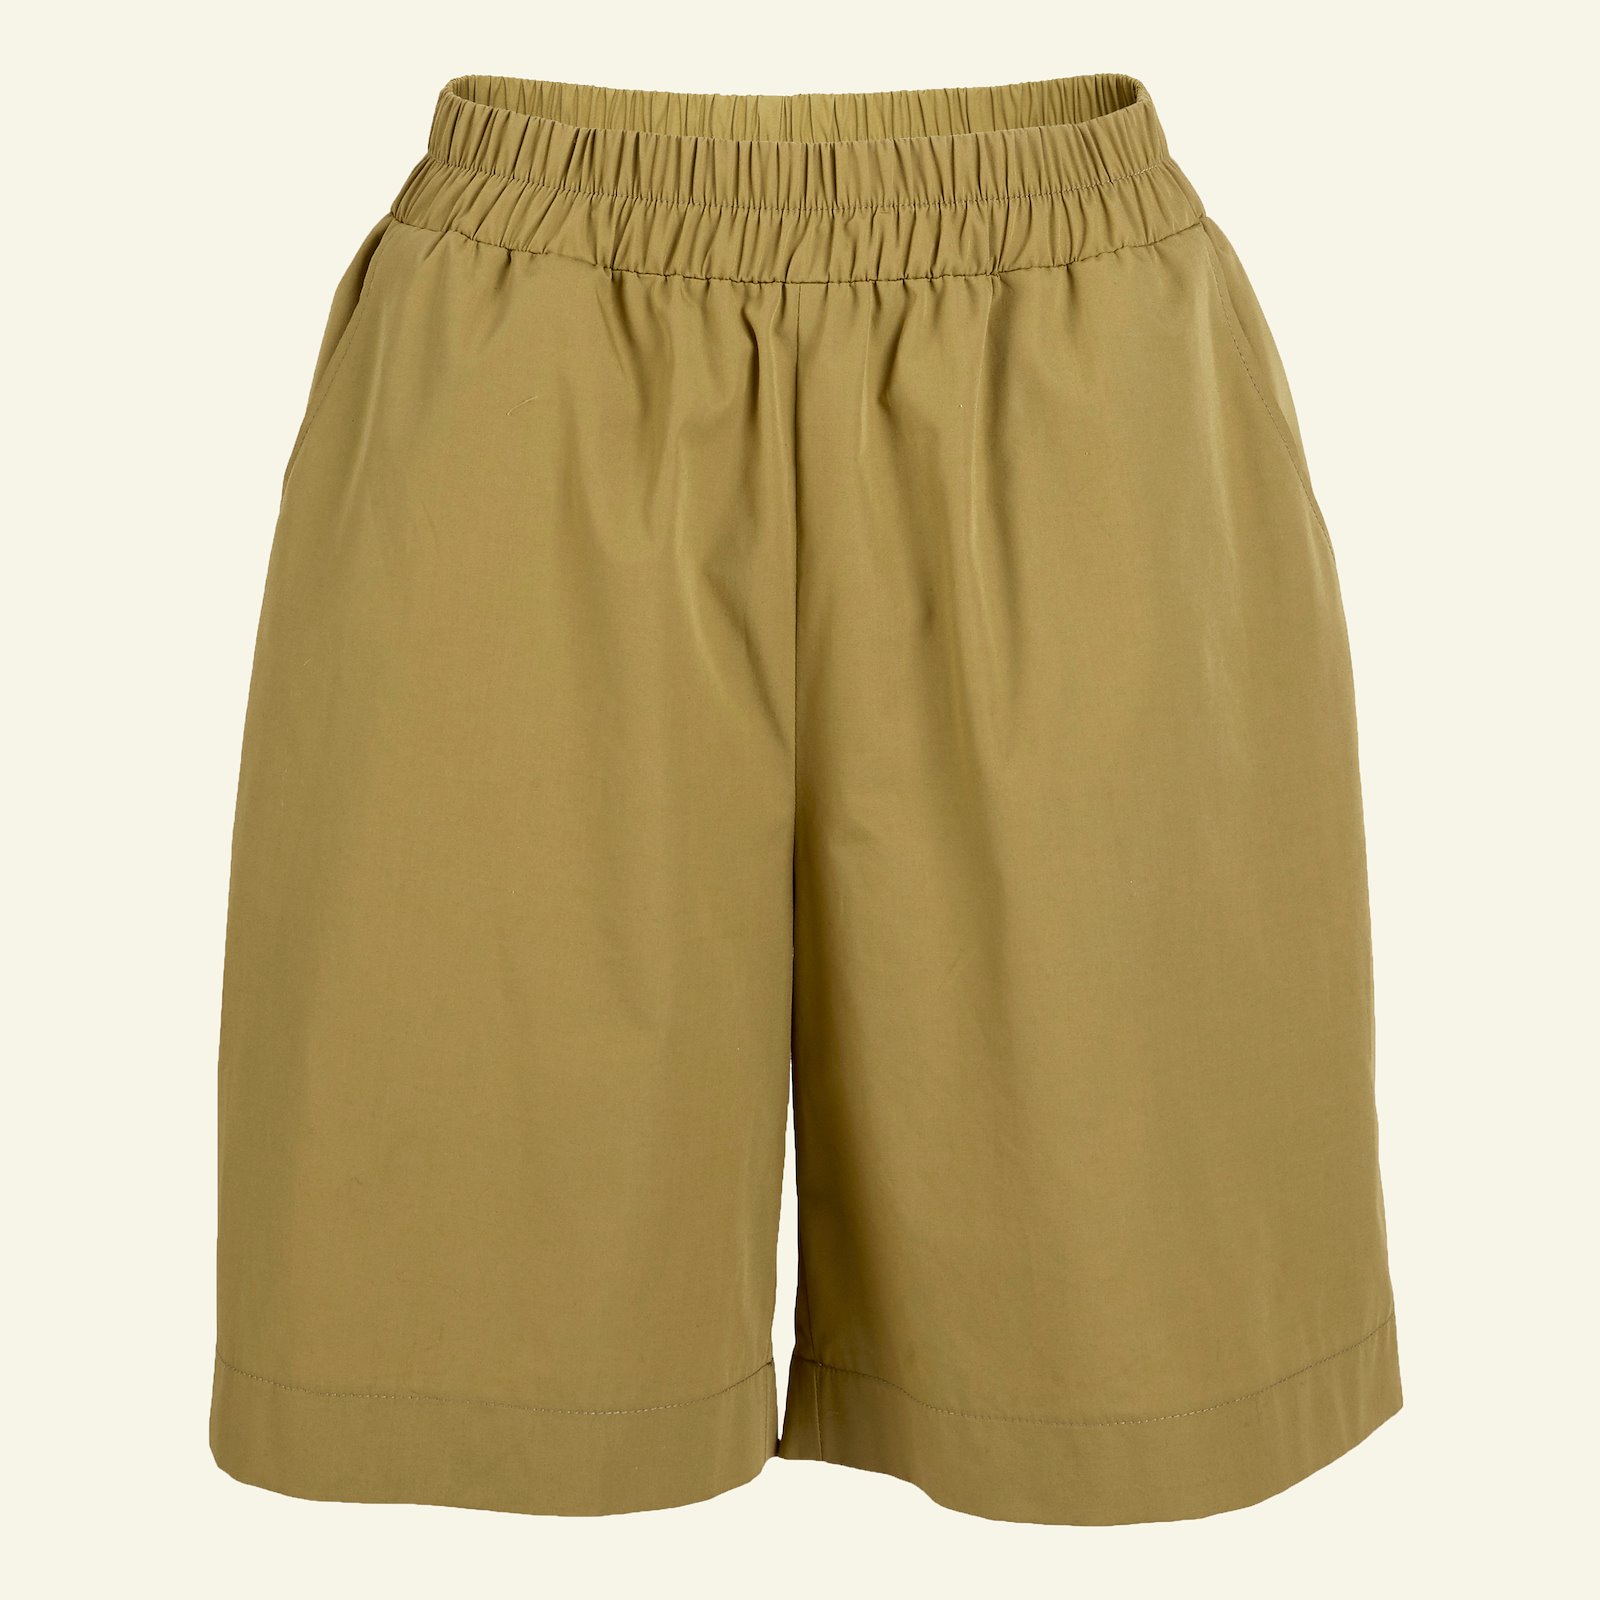 Wide trousers/shorts w. pockets, 38/10 p20051_501926_sskit